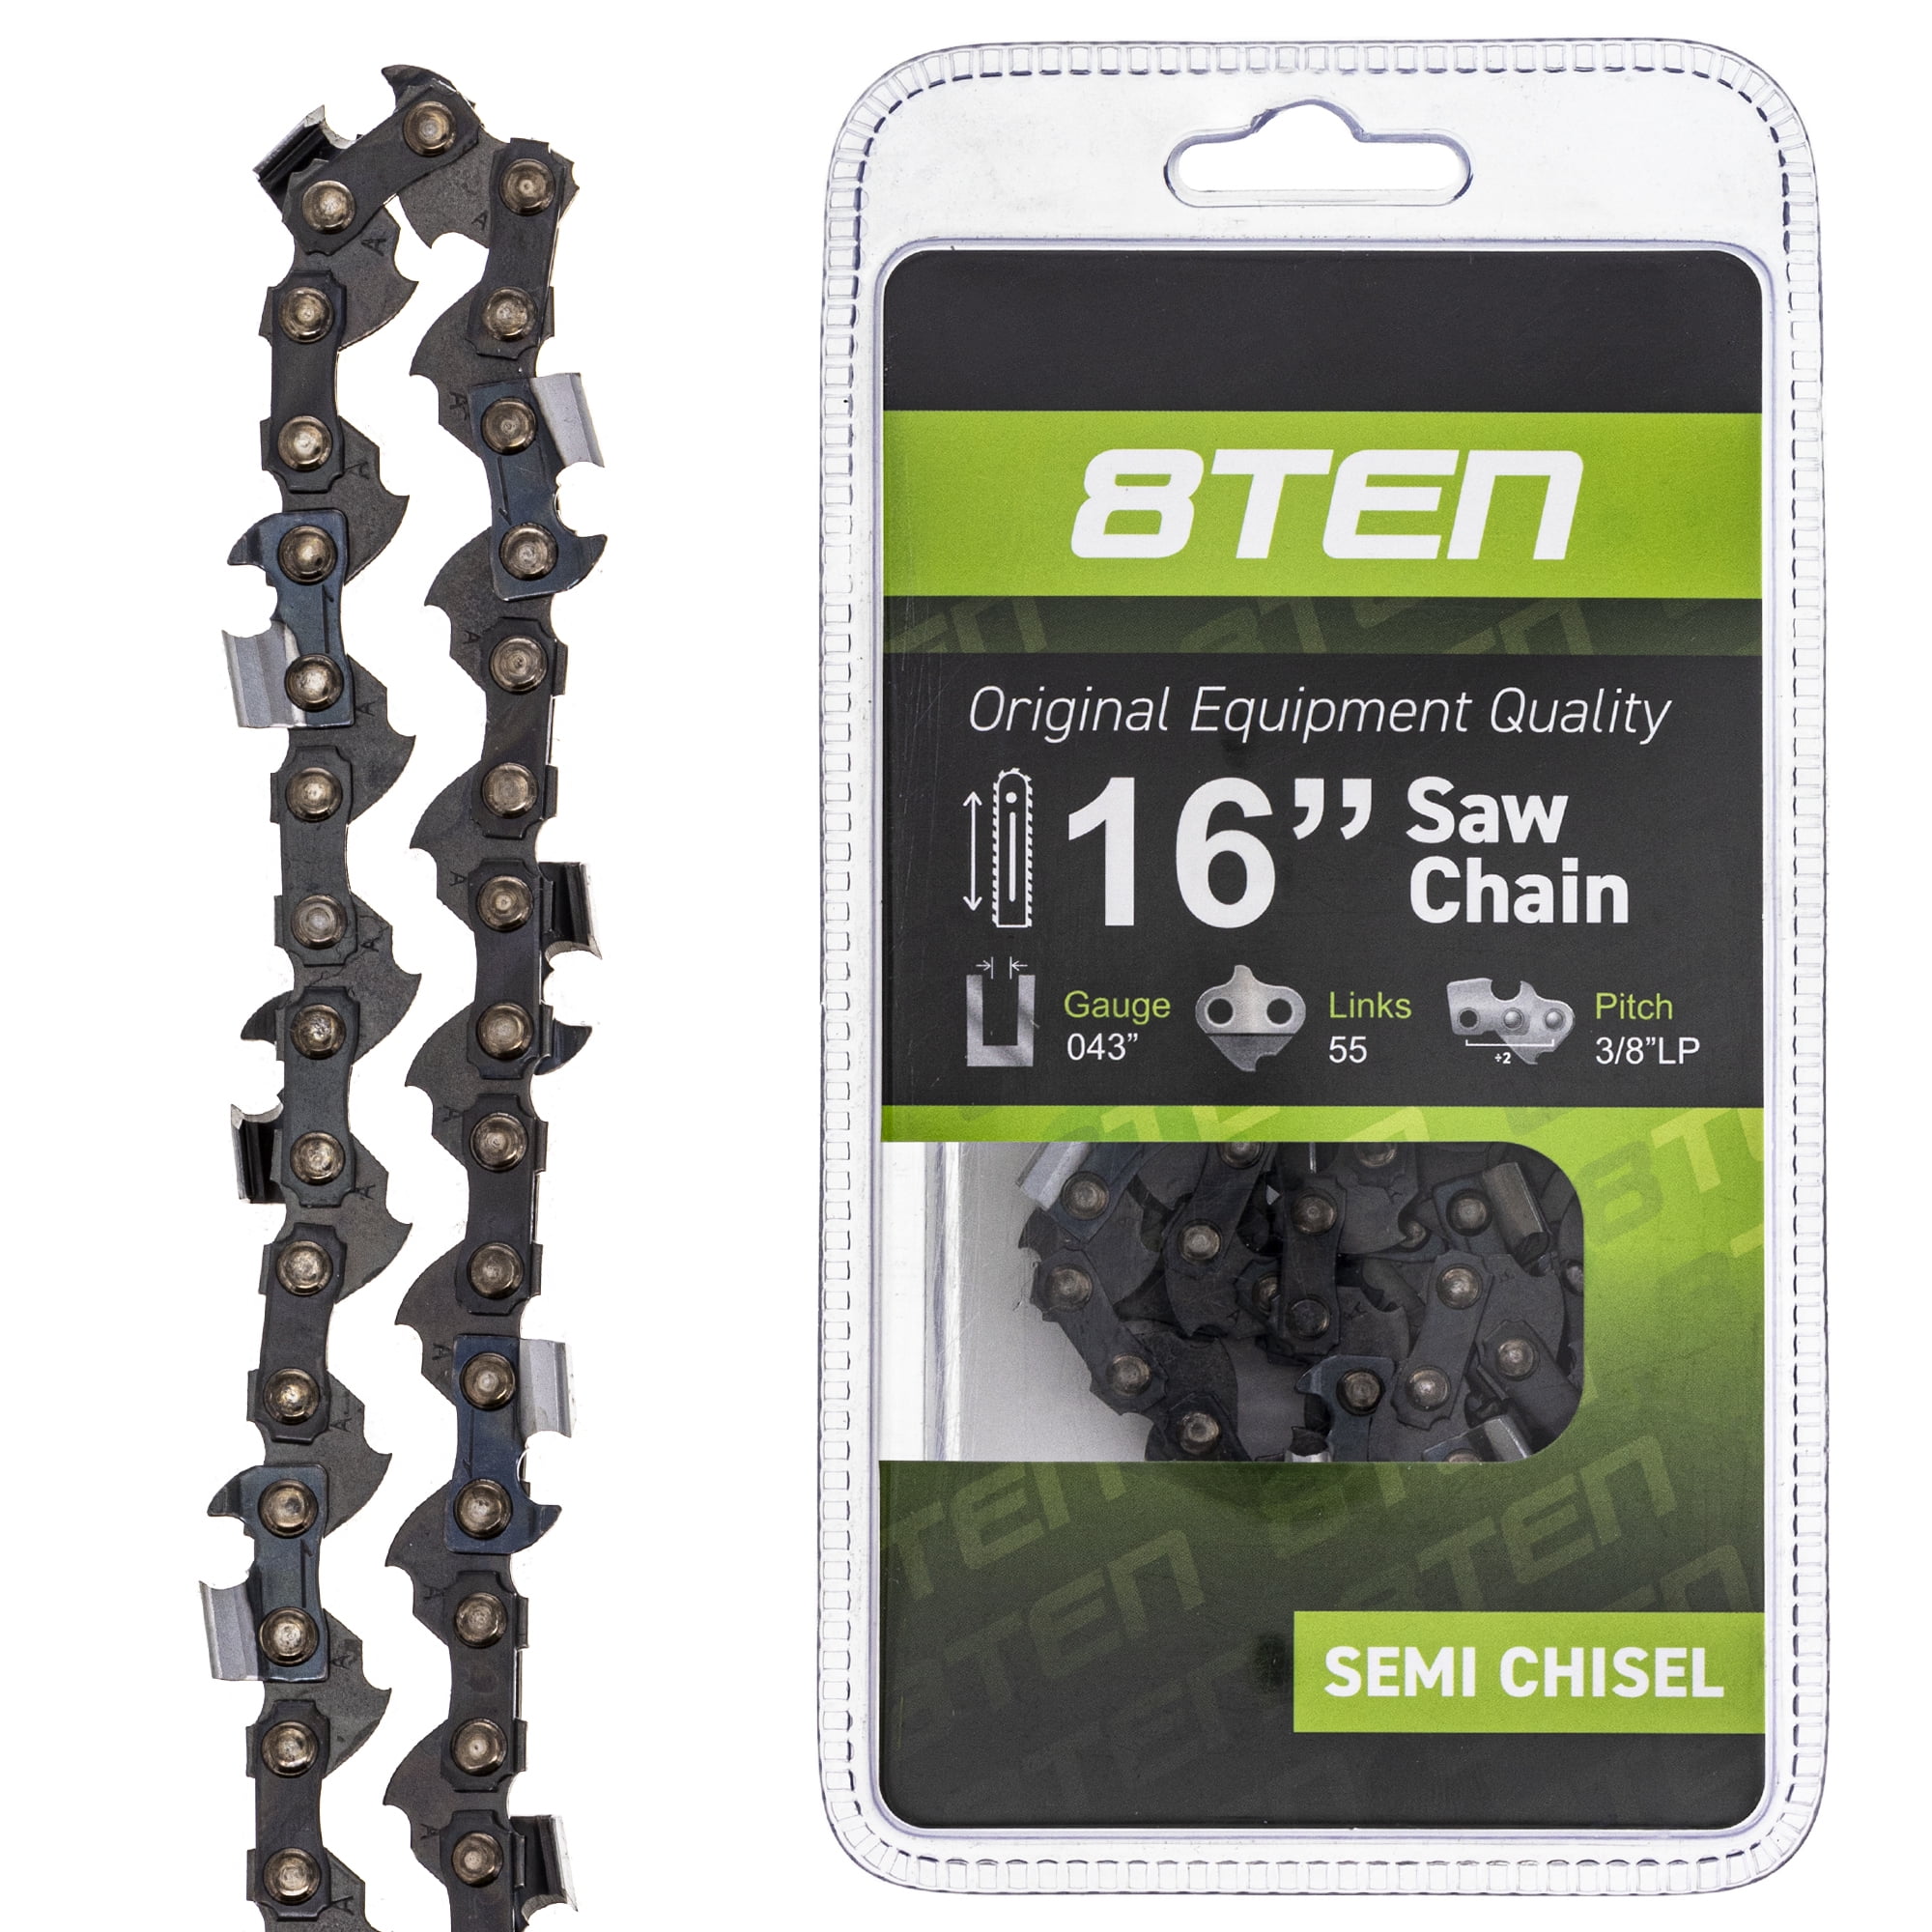 Stihl Brand 14 inch Chain for chainsaw bar 3/8 Pitch .043 Gauge 50 drivers 